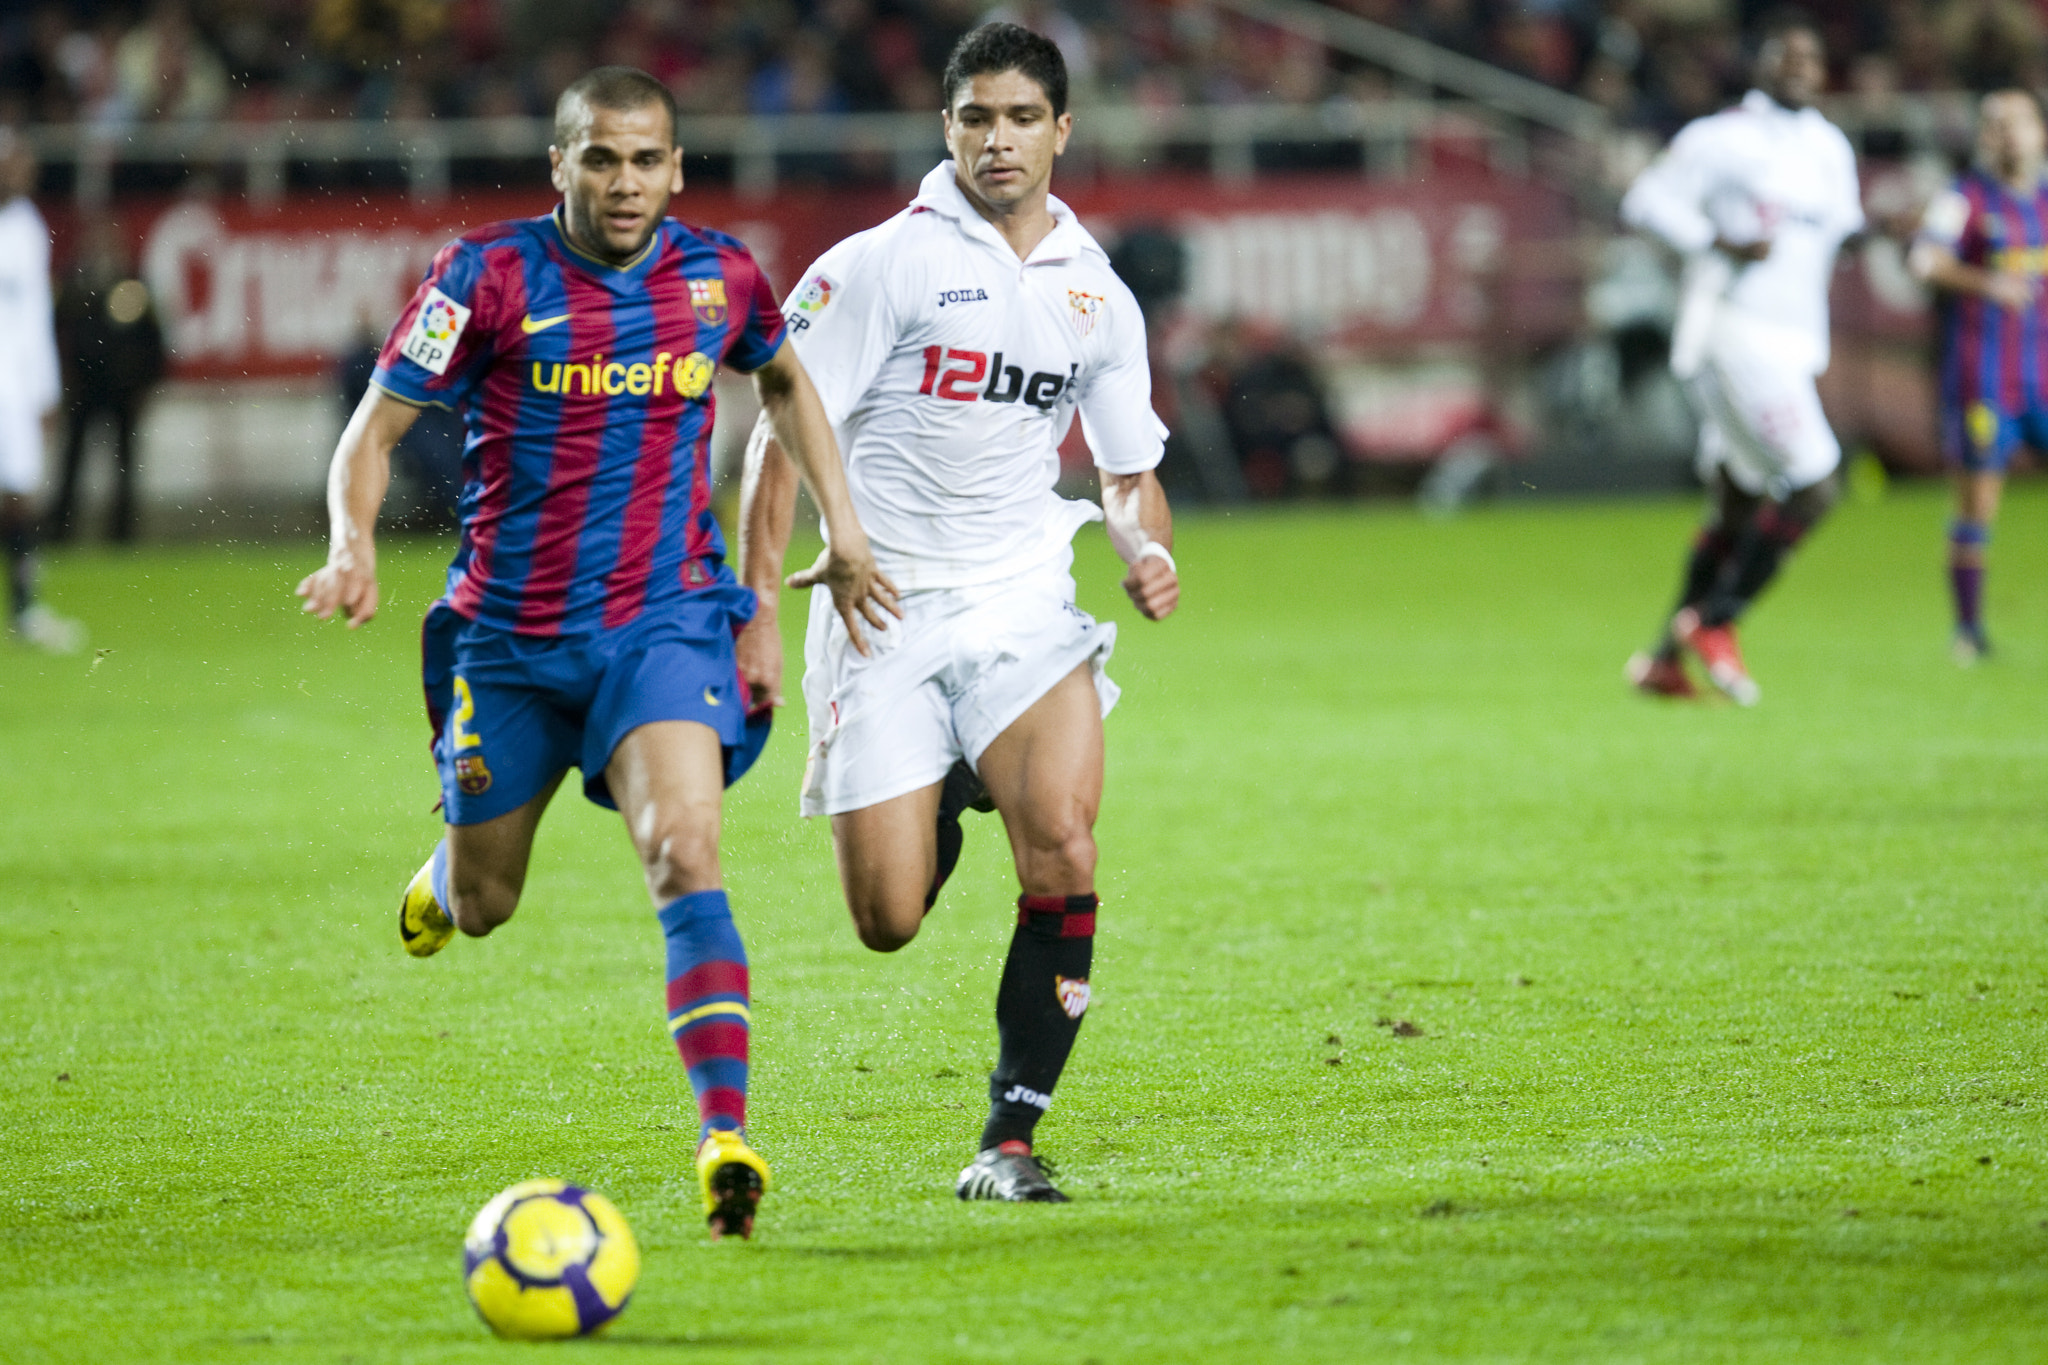 Daniel Alves with the ball pursued by Renato. Spanish Cup game between Sevilla FC and FC Barcelona,